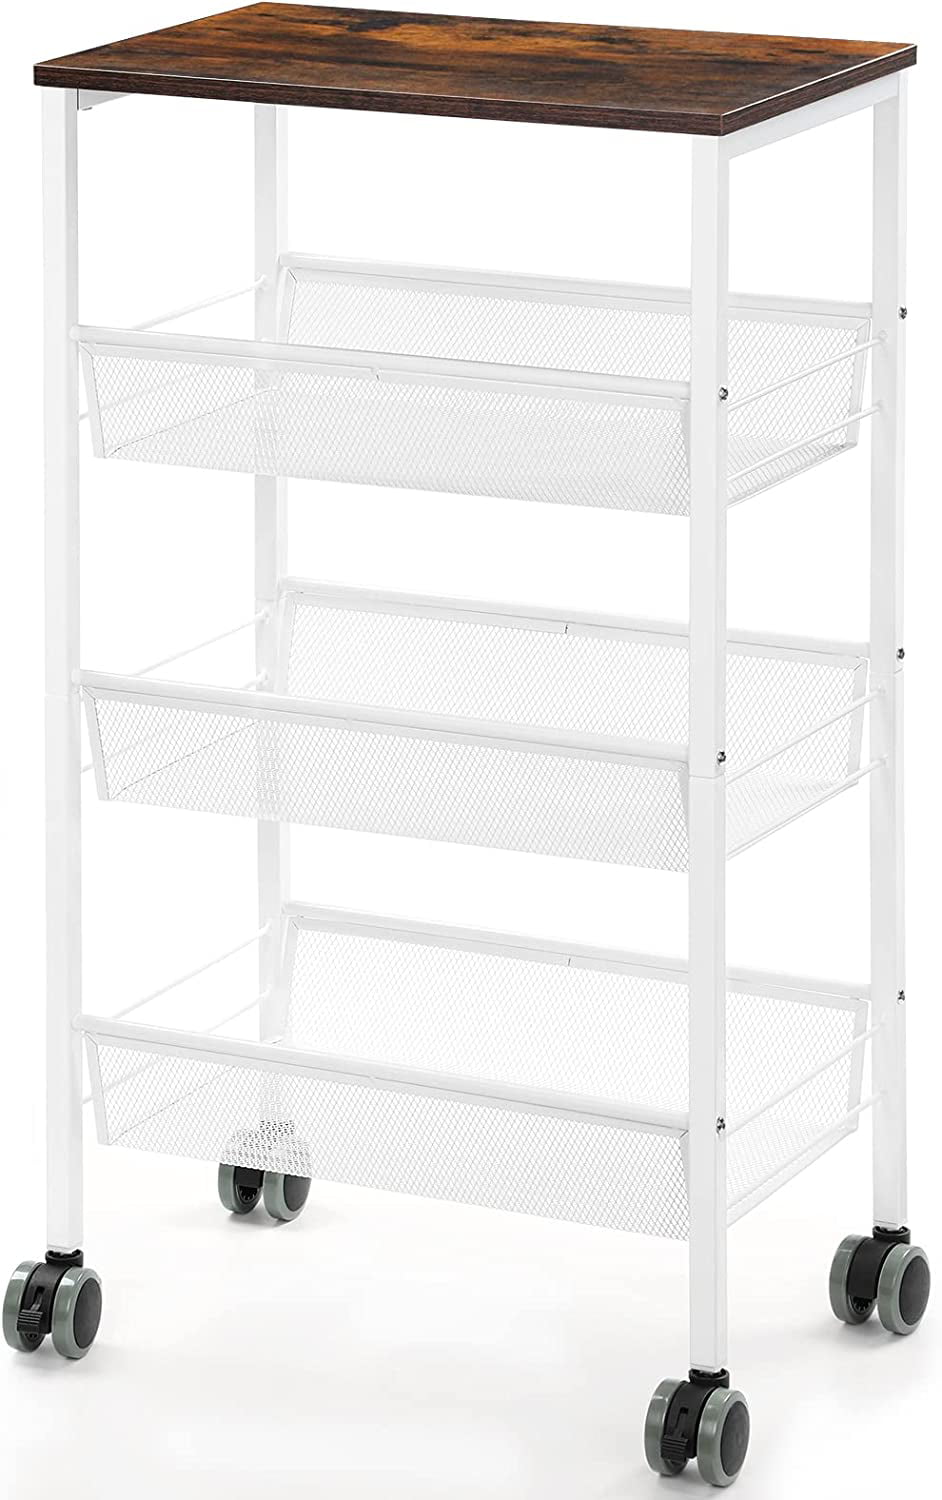 3 Tier Kitchen Storage Rack Cart with Lockable Wheels and Wood Top， White